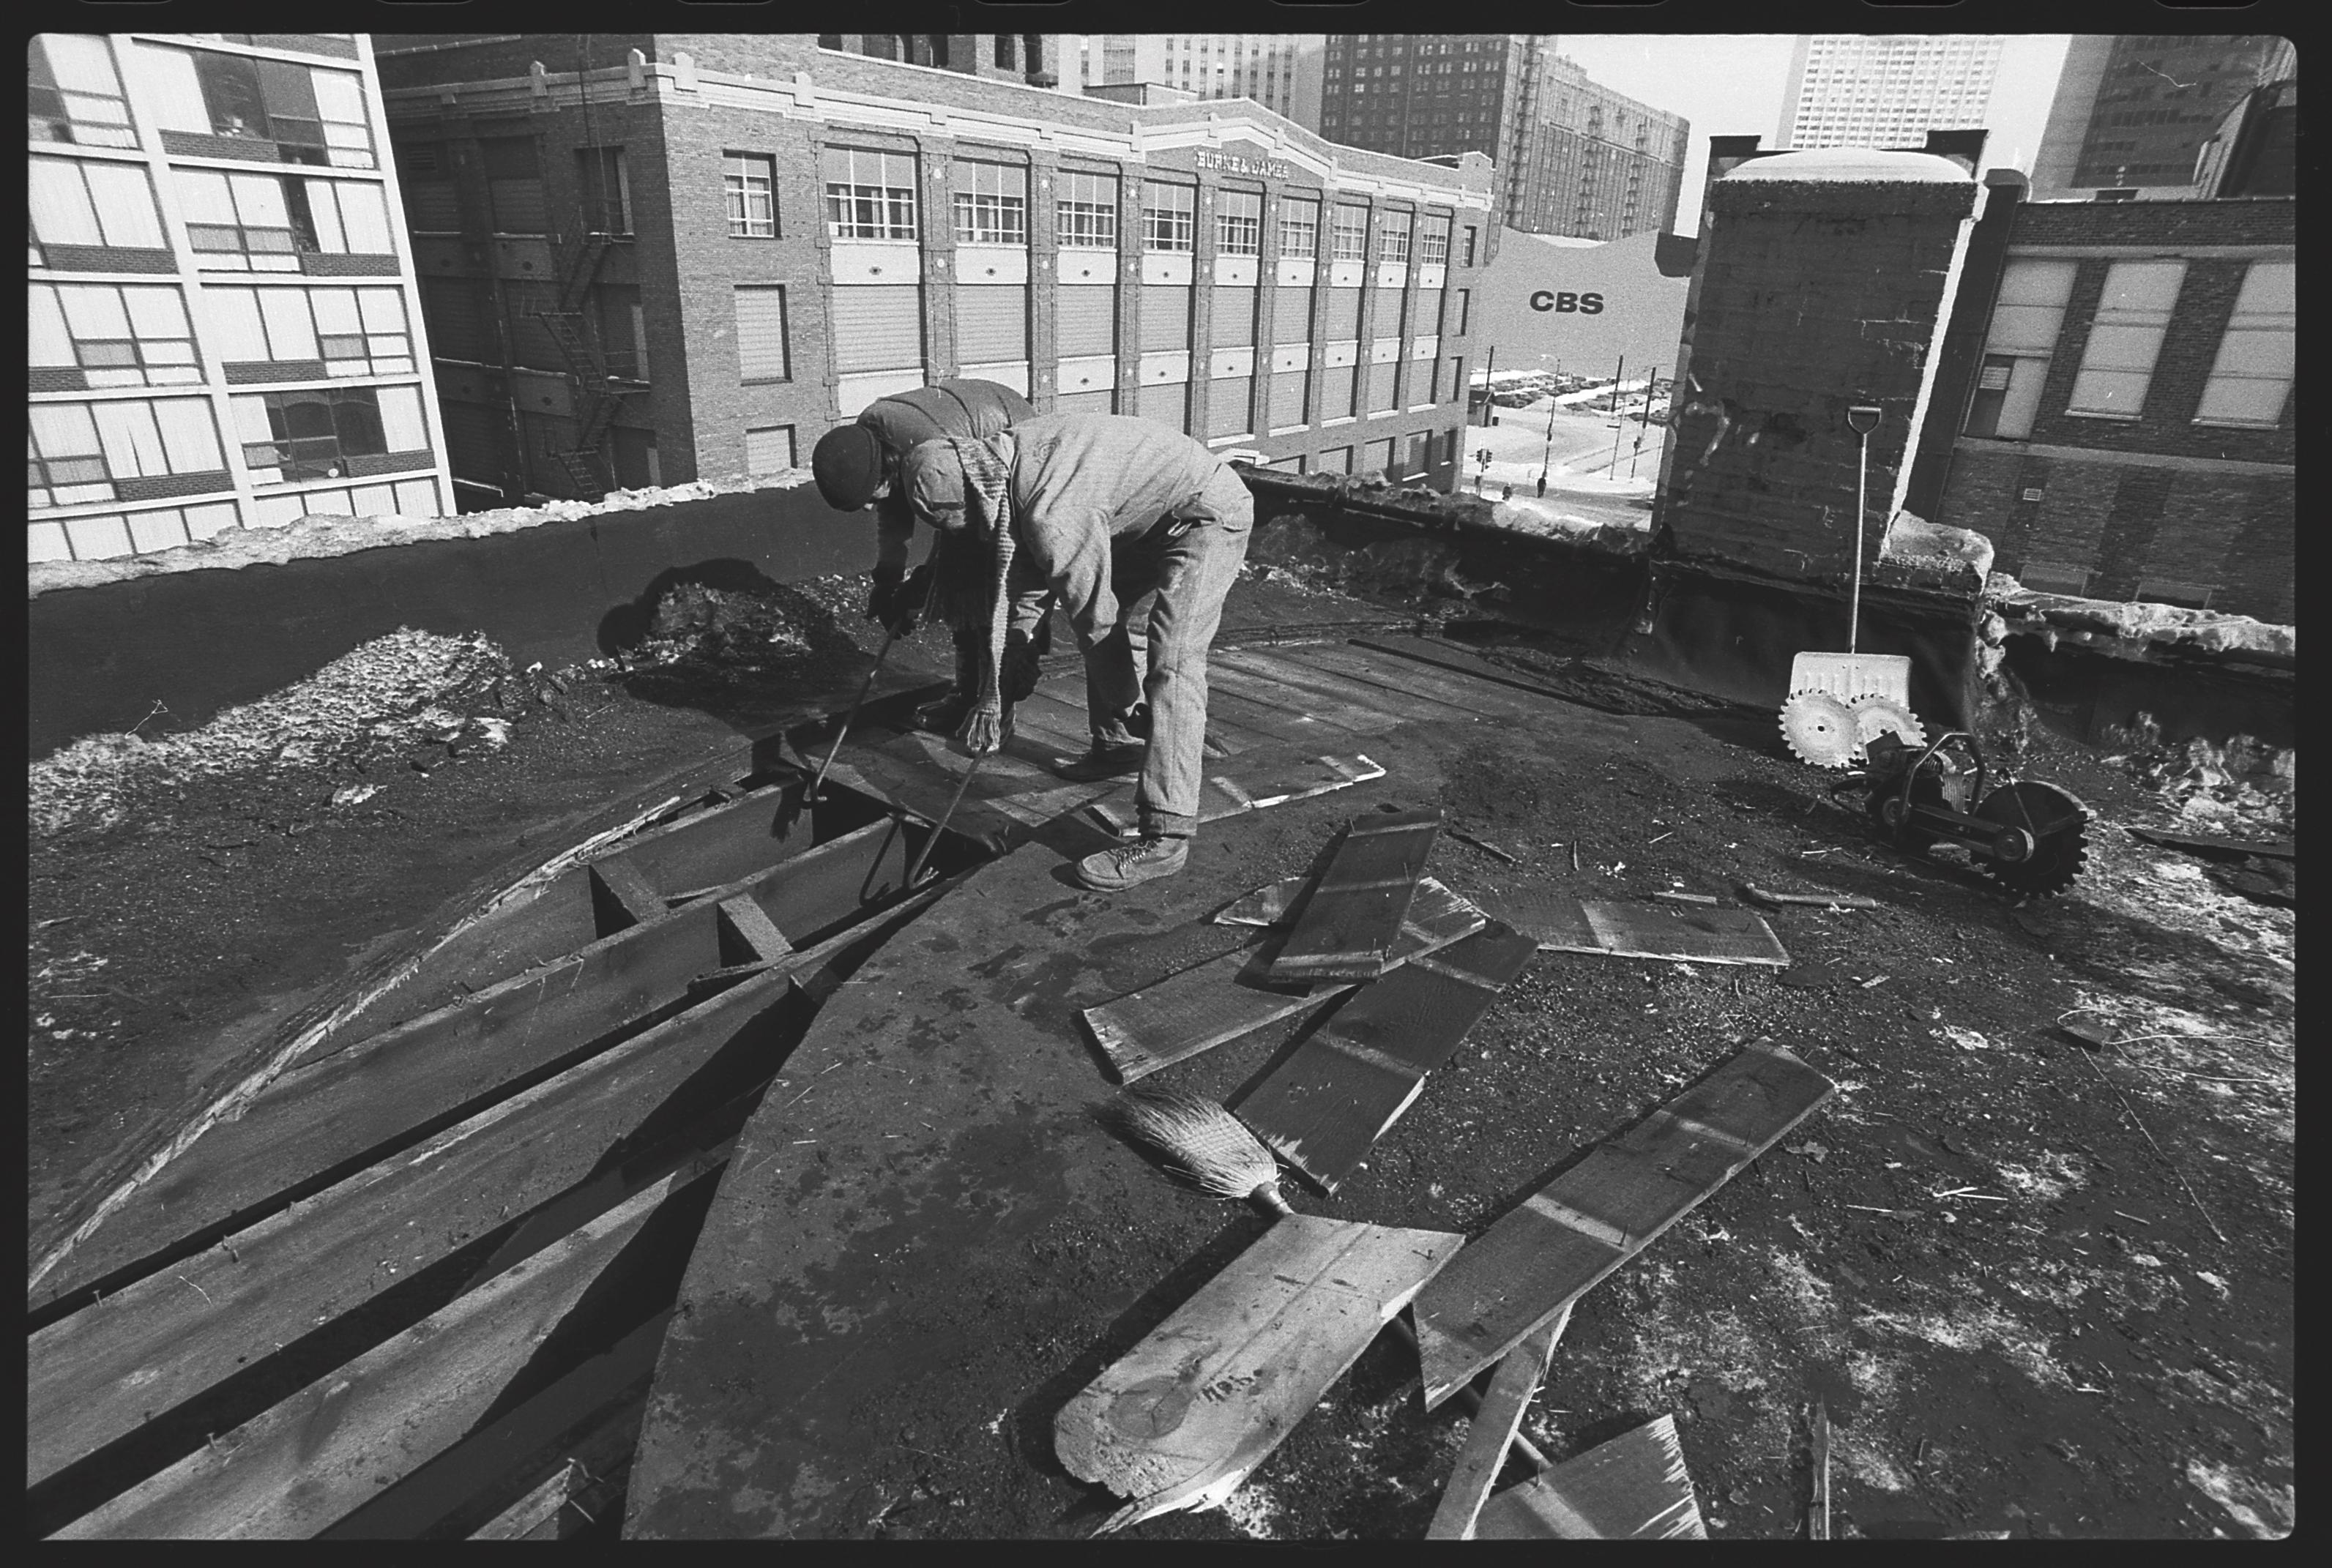 Two people use crowbars to remove boards from the roof of a building in a curved manner. The rafters below are exposed in the part closest to the foreground.